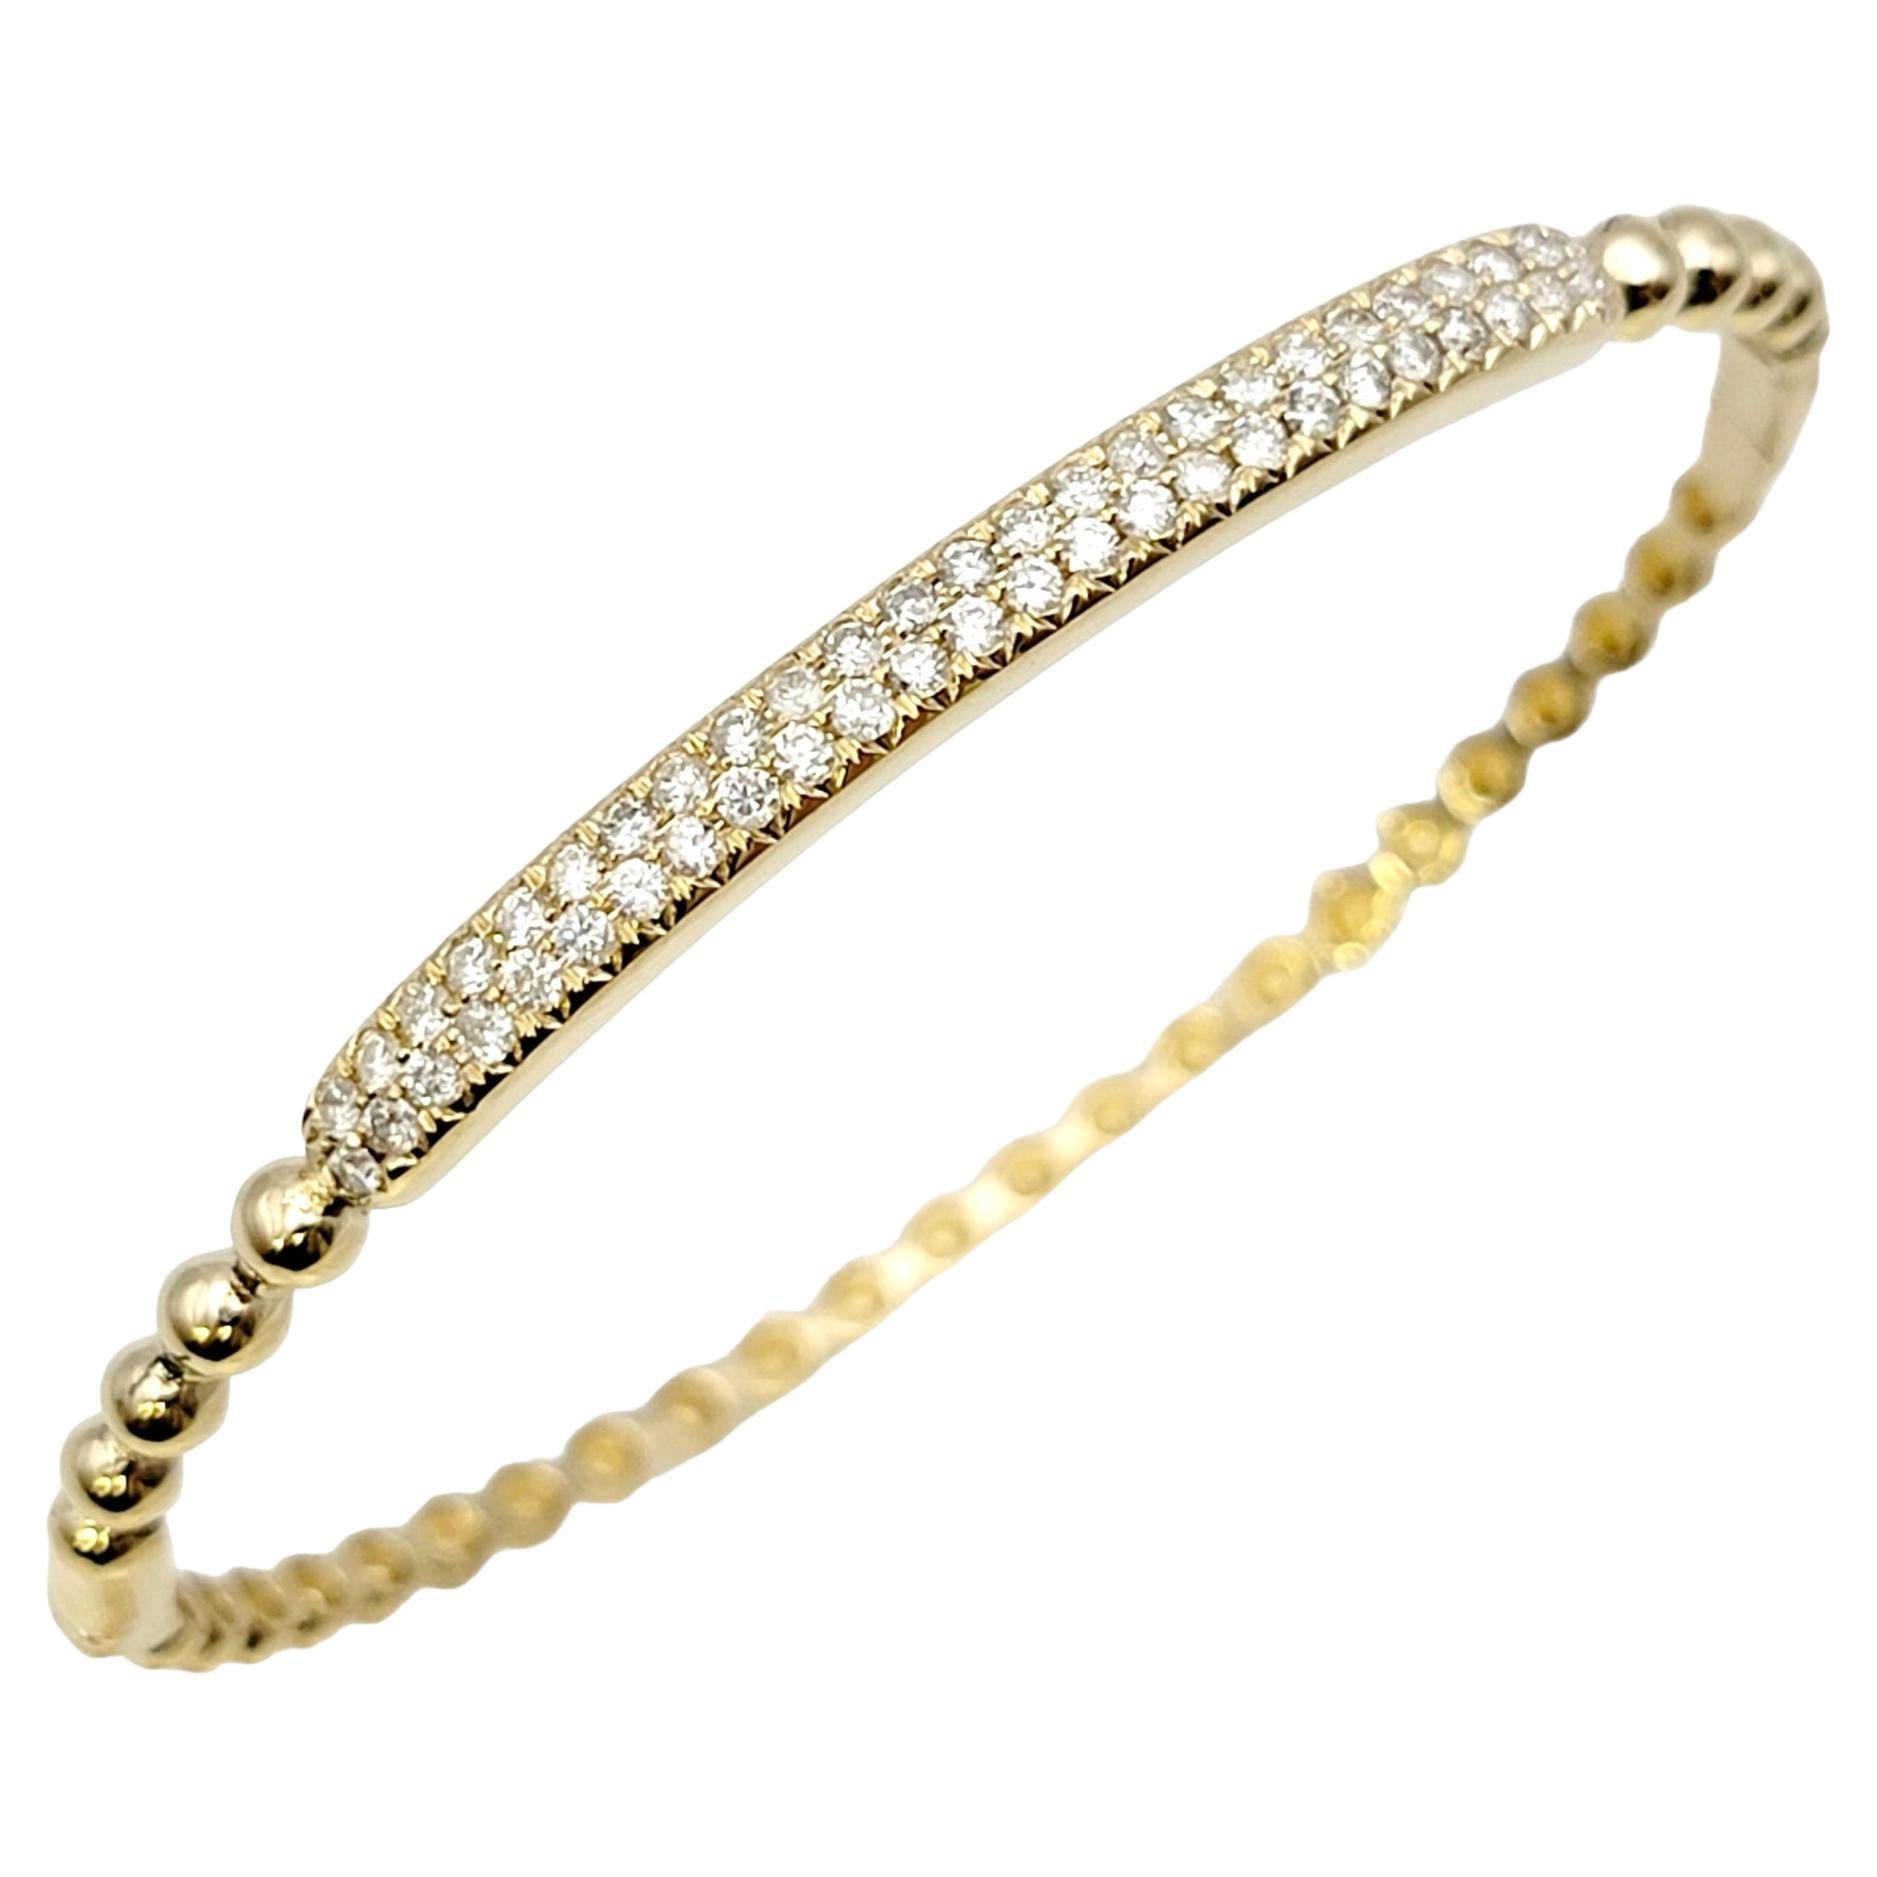 Contemporary bangle bracelet in a 14K yellow gold featuring a narrow bubble design. The top portion of the sleek bracelet is adorned with two elegant row of sparkling pave diamonds. Stack it with other bracelets for a modern look, or simply wear on